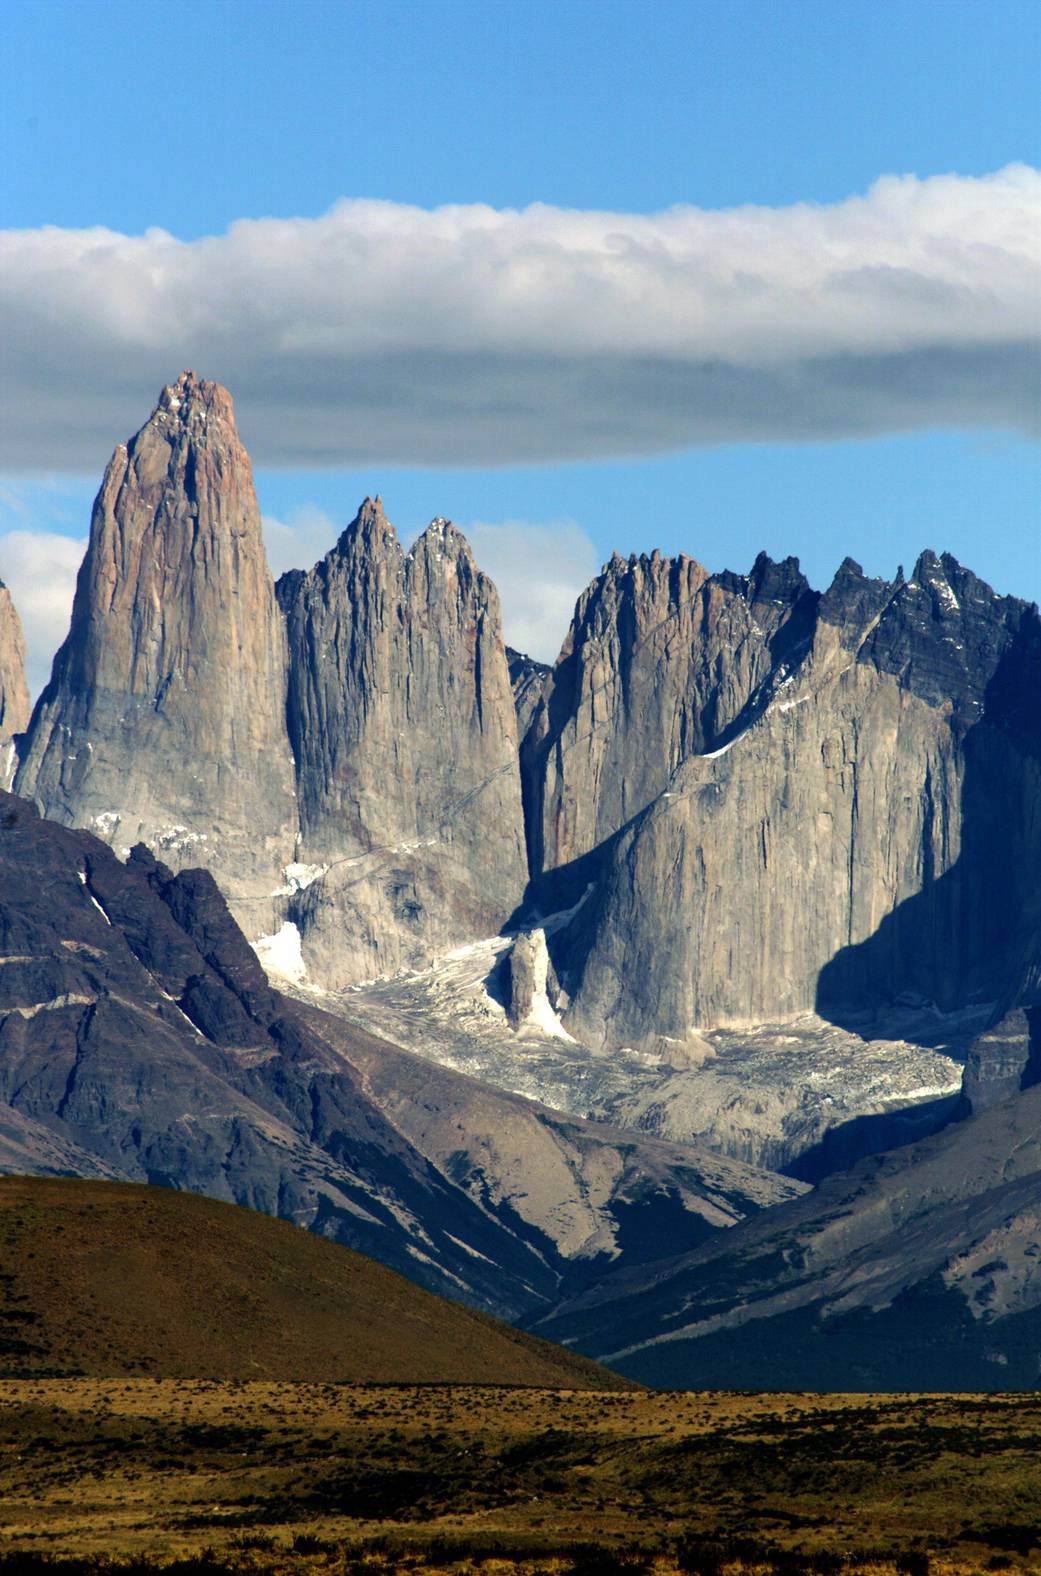 The Cuernos del Paine Mountains, Torres del Paine National Park in Chile